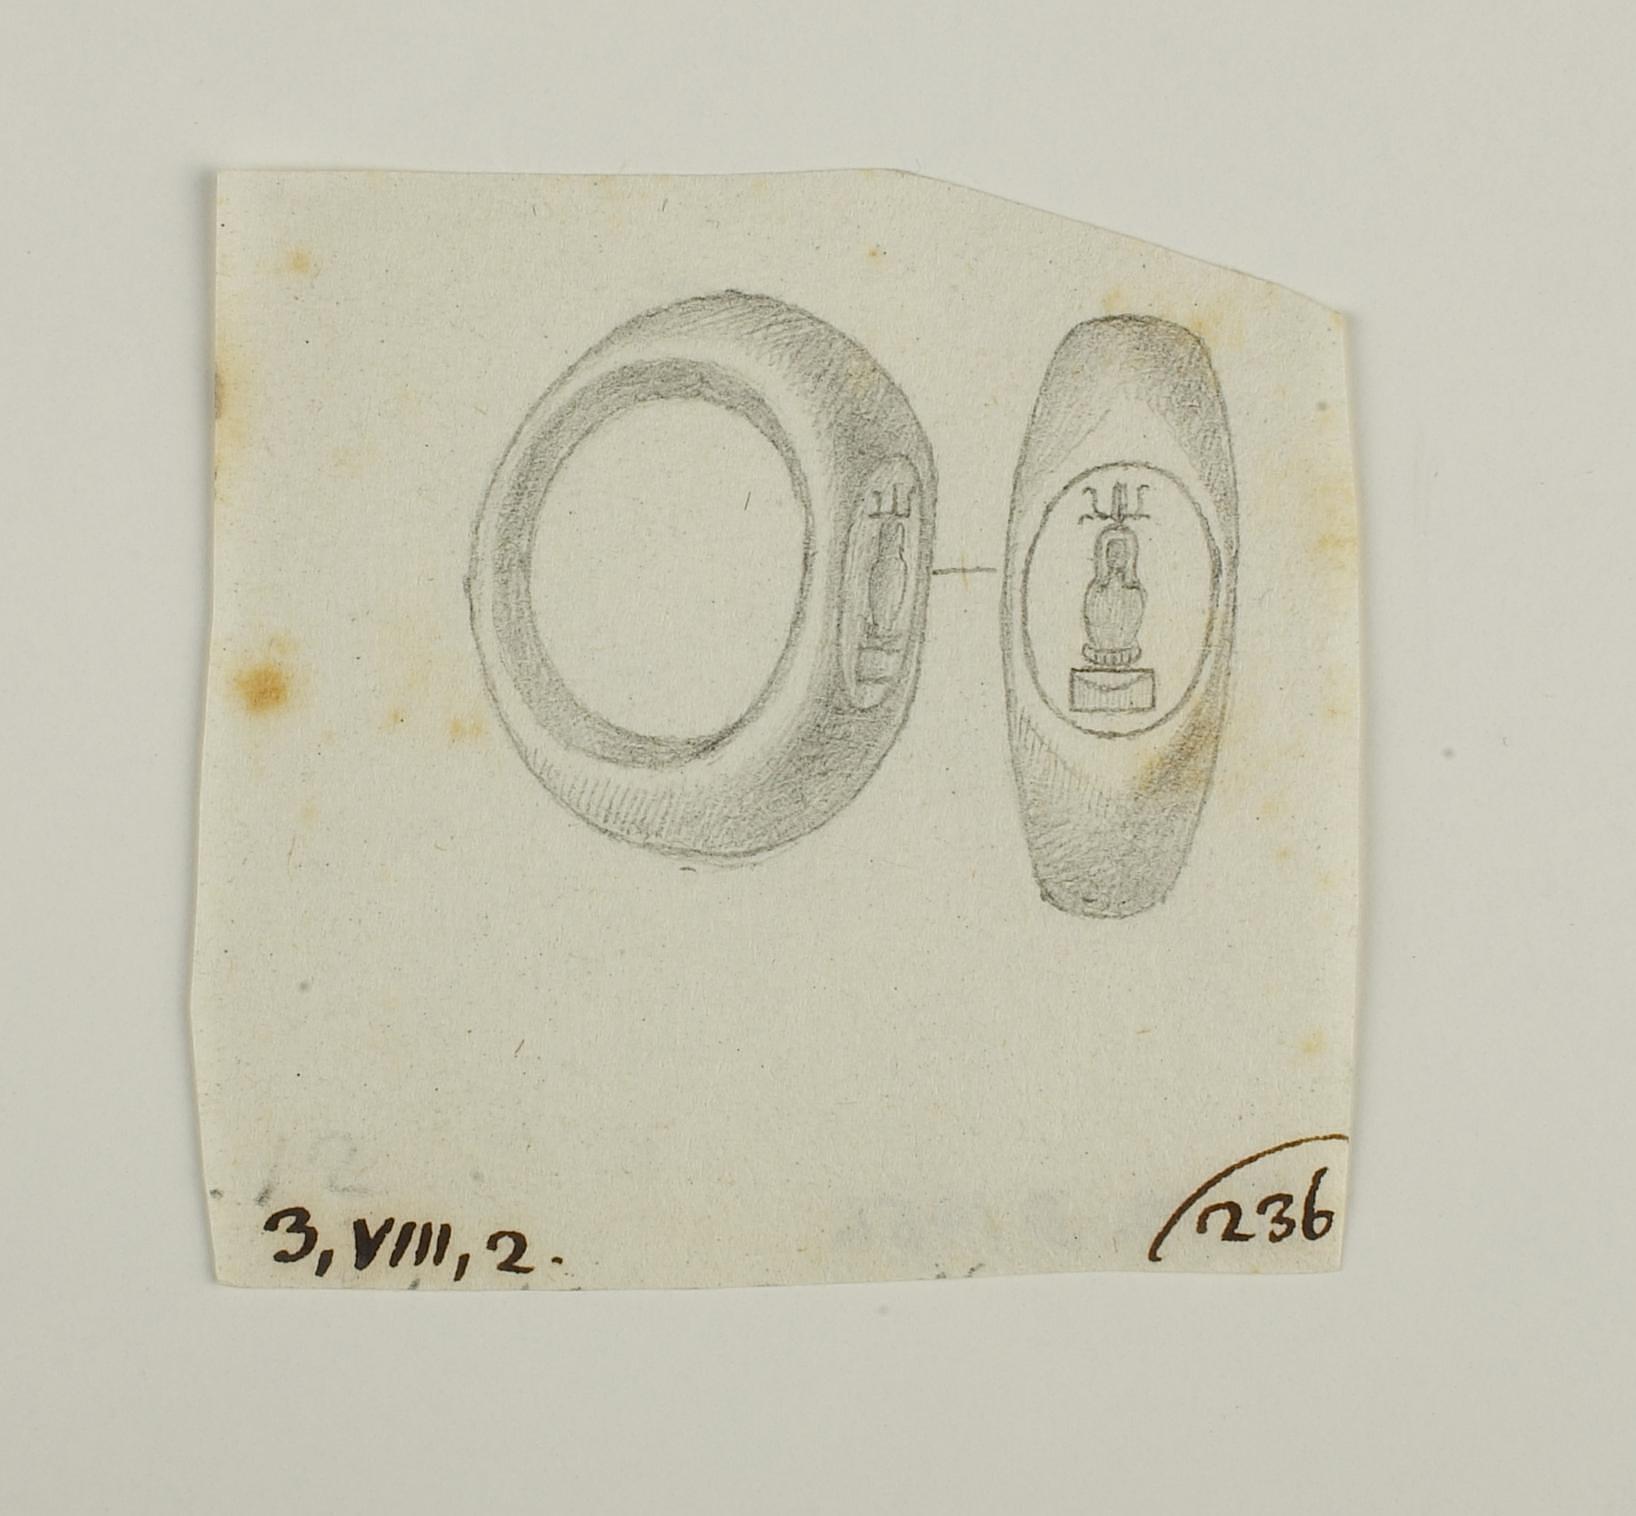 Ring with Canopic jar, D1456